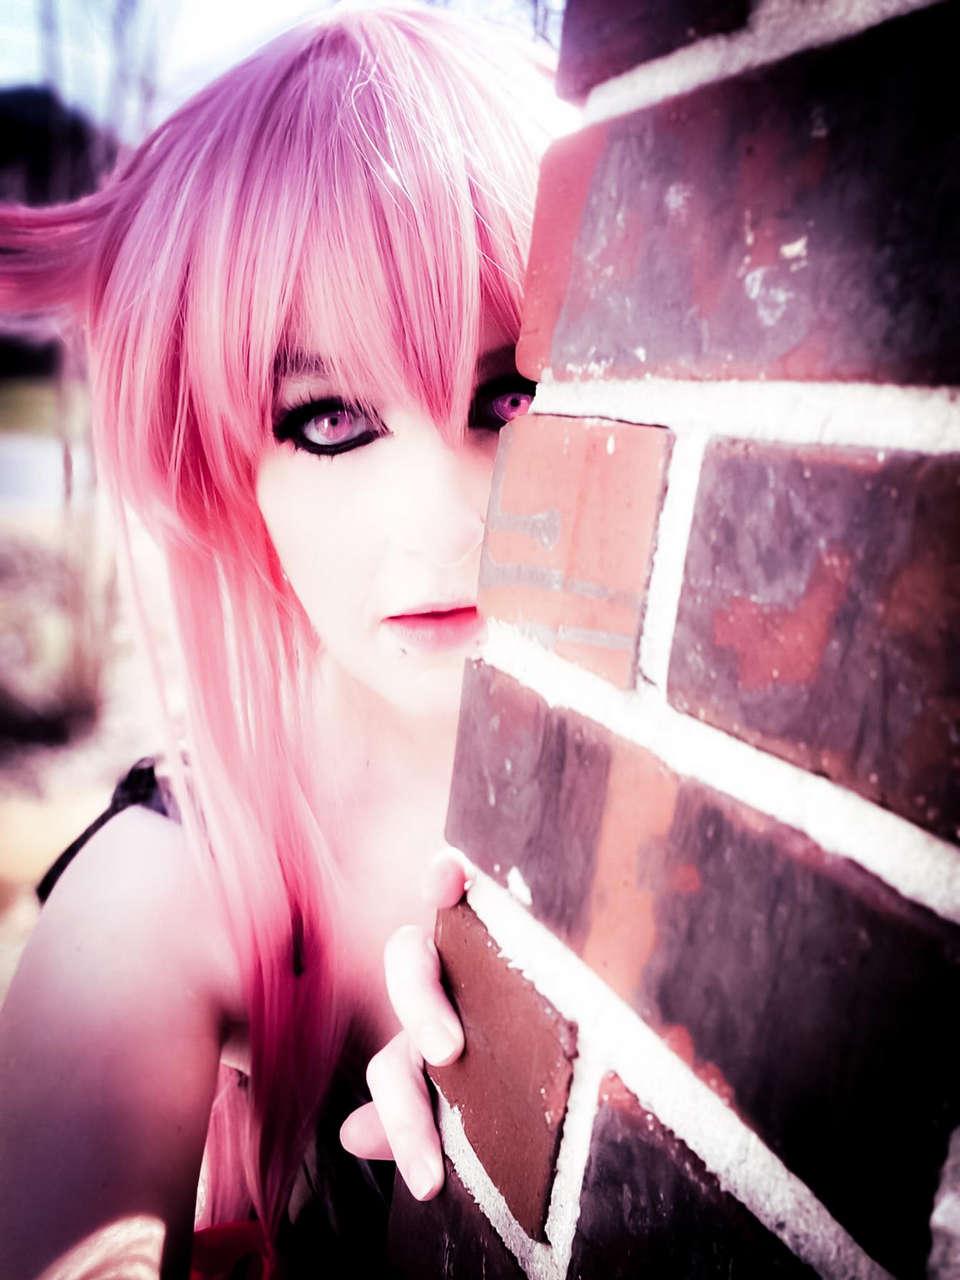 One Of My Favorite Yuno Gasai Pics From My Shoot I Hope You Like I